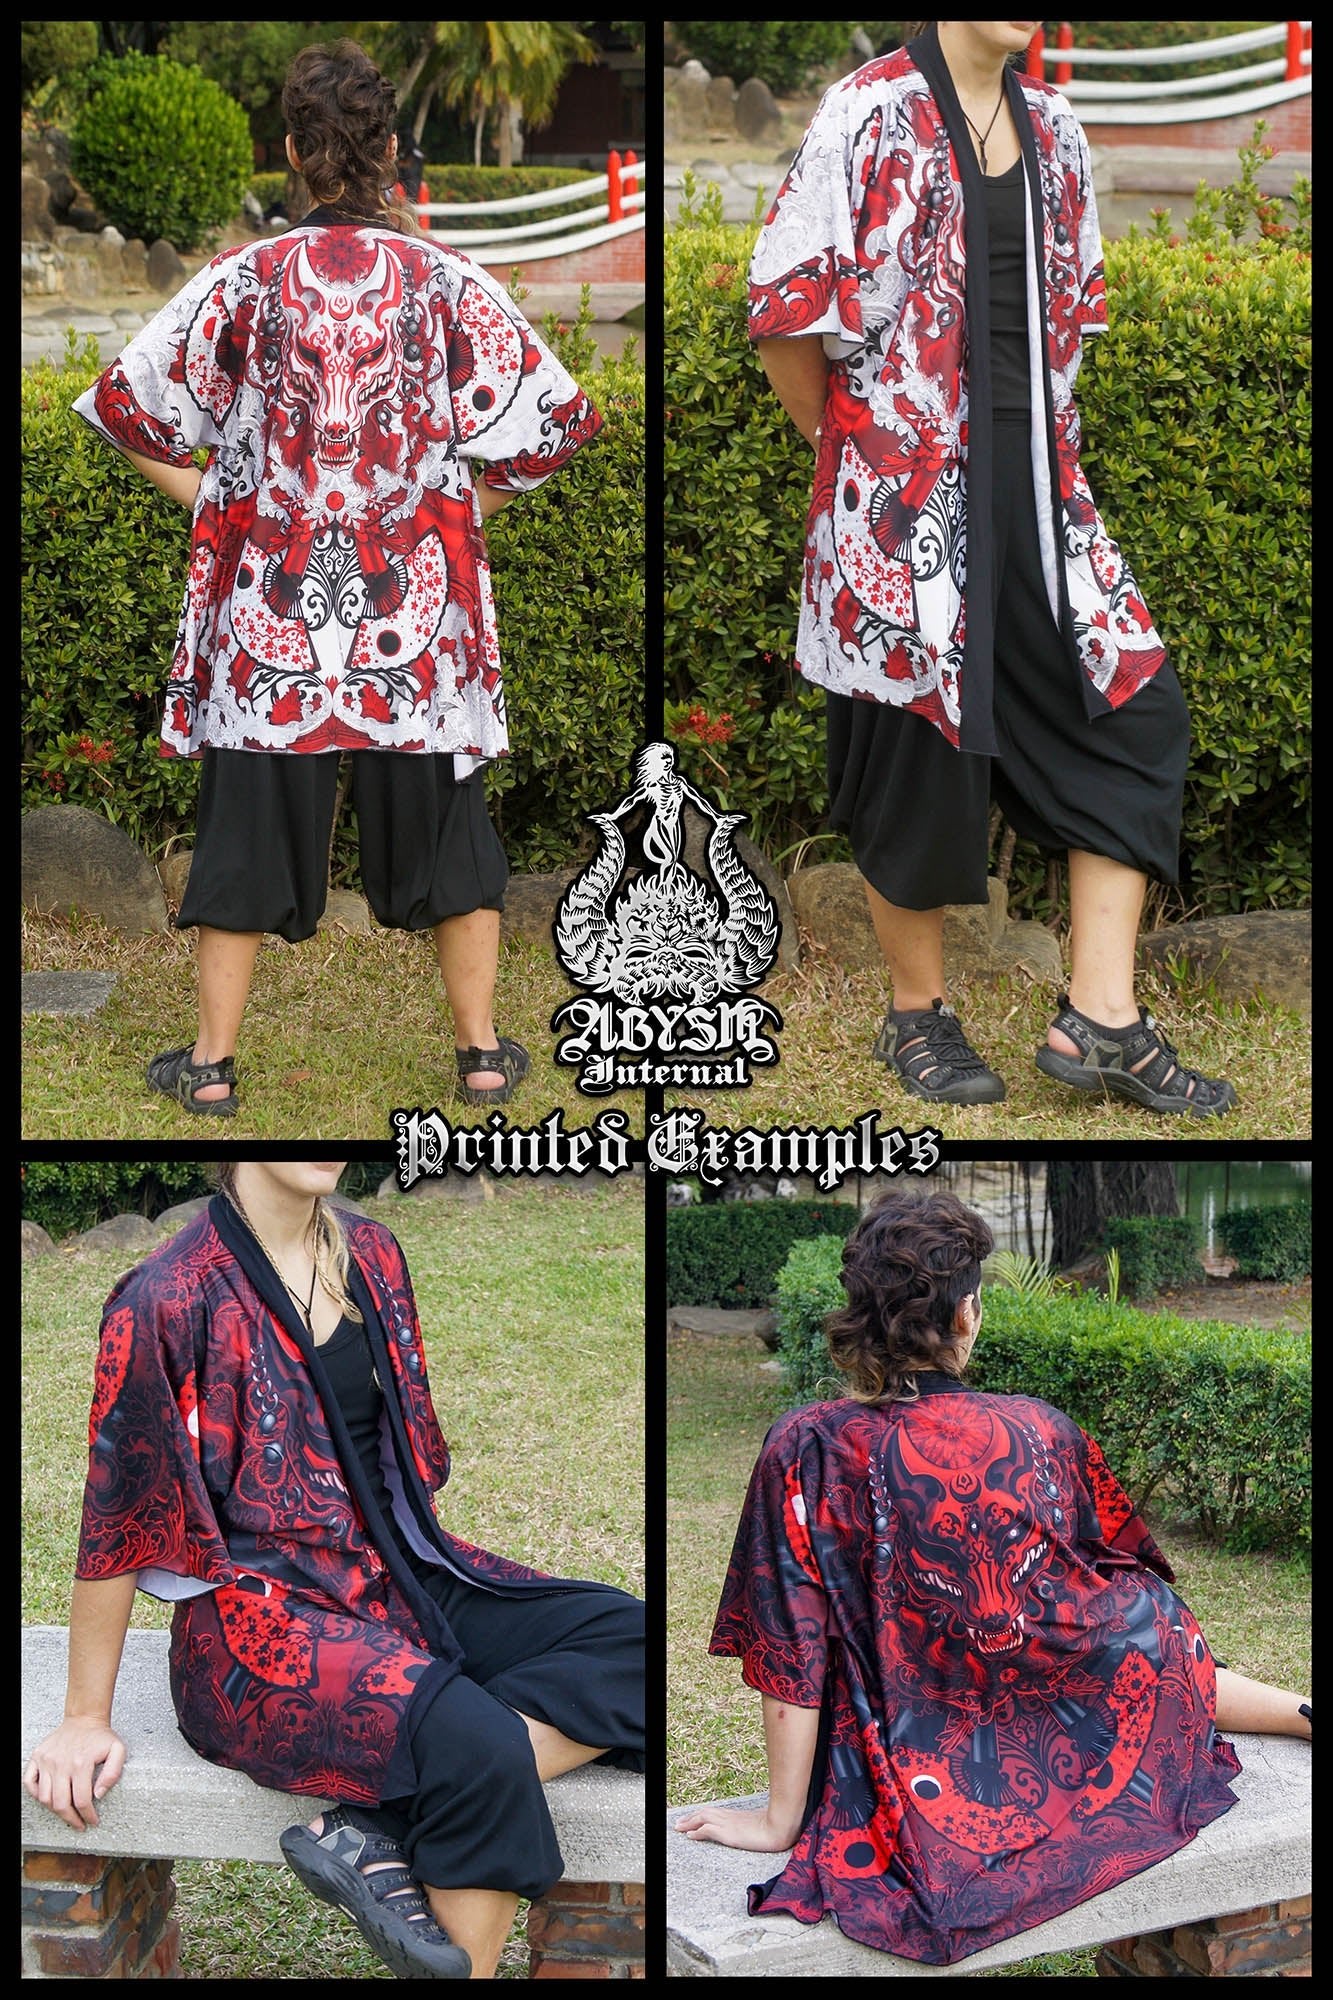 Tree of Life Cover Up, Beach Outfit, Celtic Party Kimono, Wicca Summer Festival Robe, Witchy Indie and Alternative Clothing, Unisex - Pastel Goth - Abysm Internal